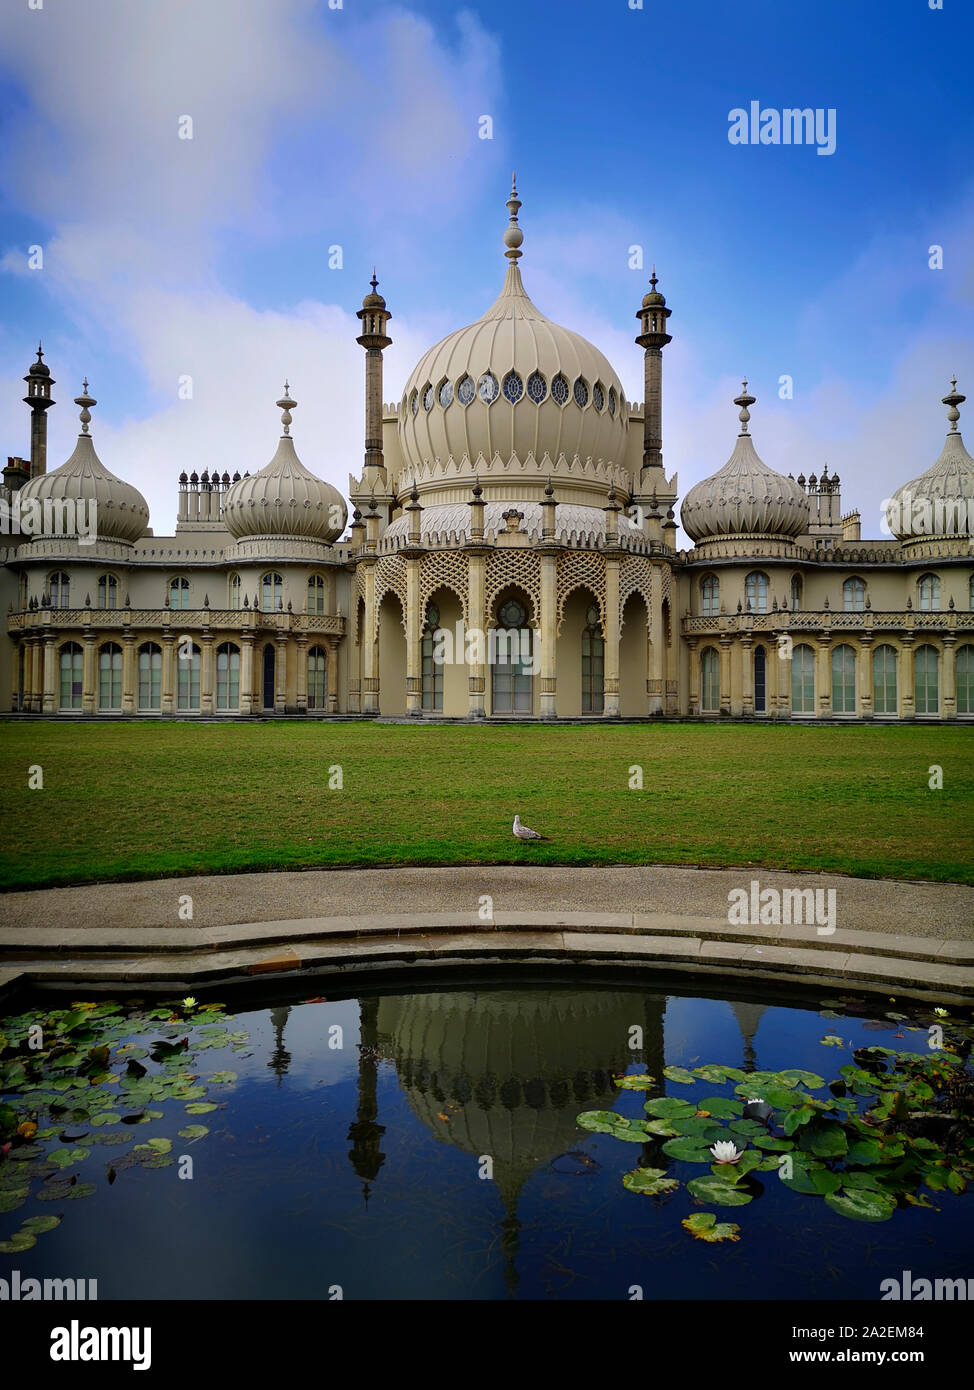 A lone seagull in front of the Royal Pavilion, also known as the Brighton Pavilion, is a former royal residence located in Brighton, Sussex, England. Stock Photo